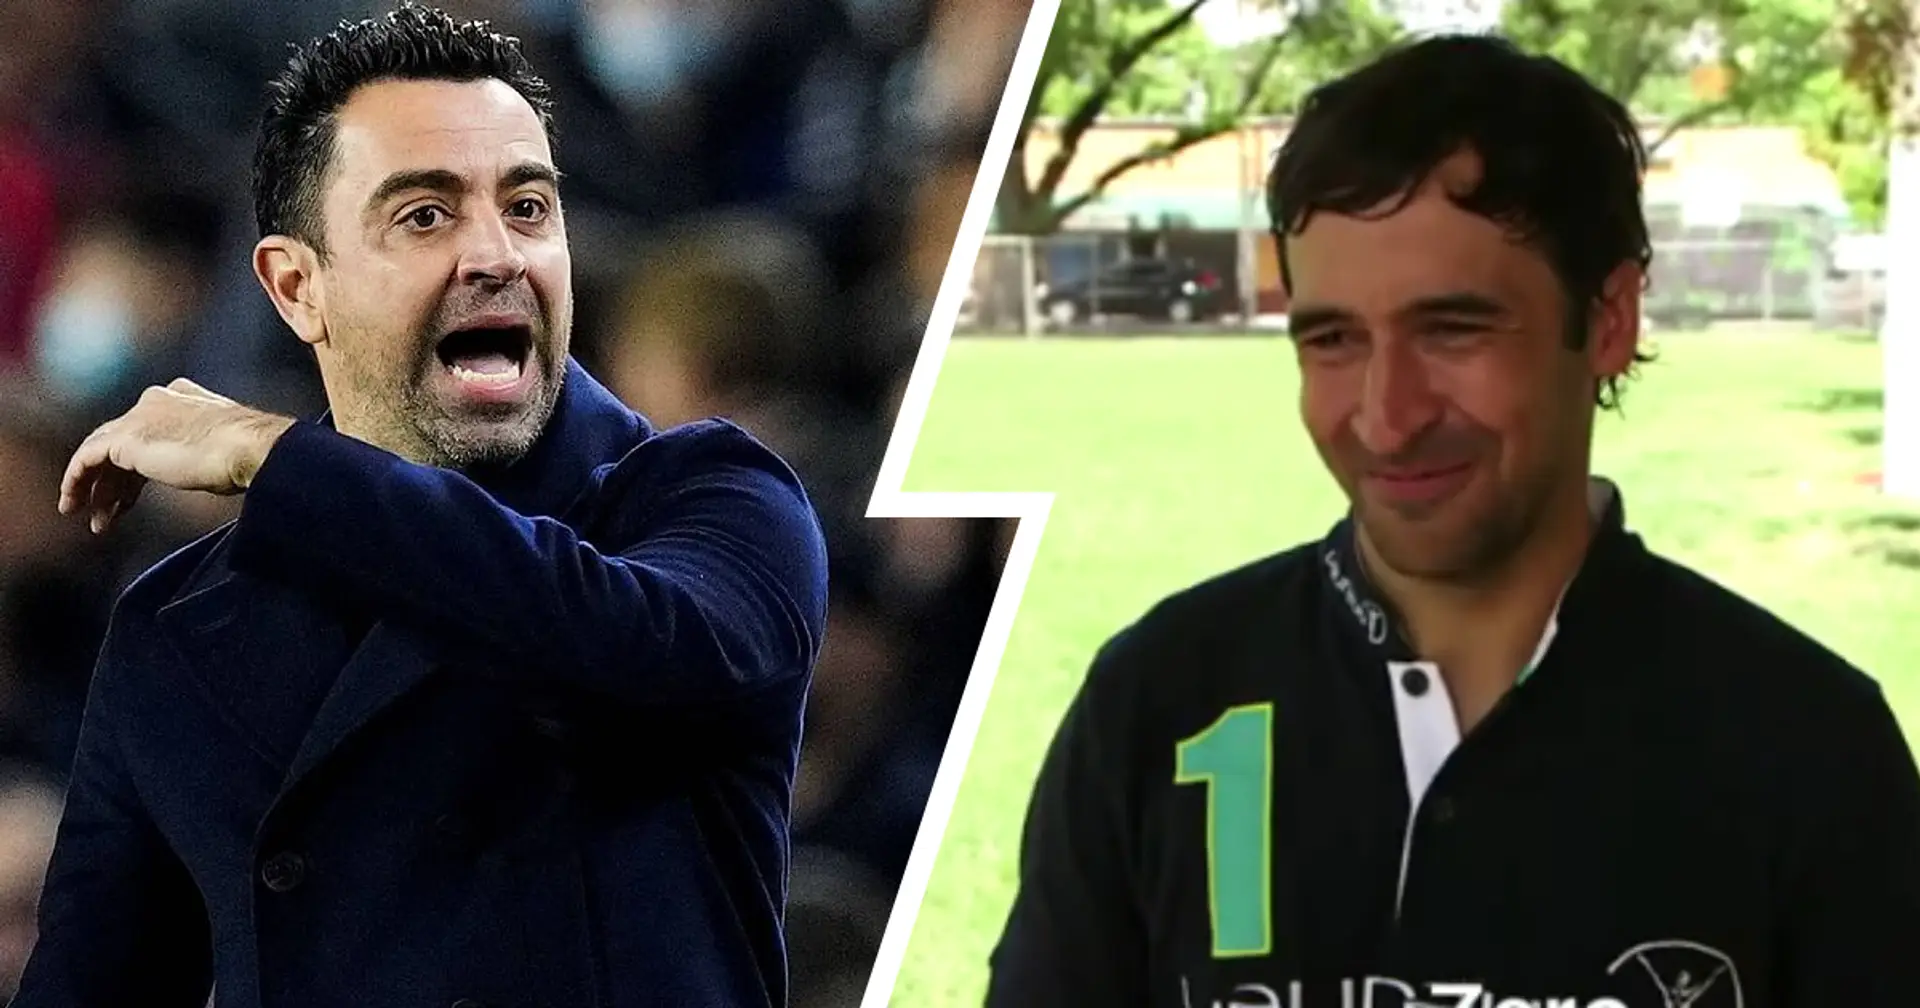 'He's been a coach since he was a player': Real Madrid legend Raul praises Xavi